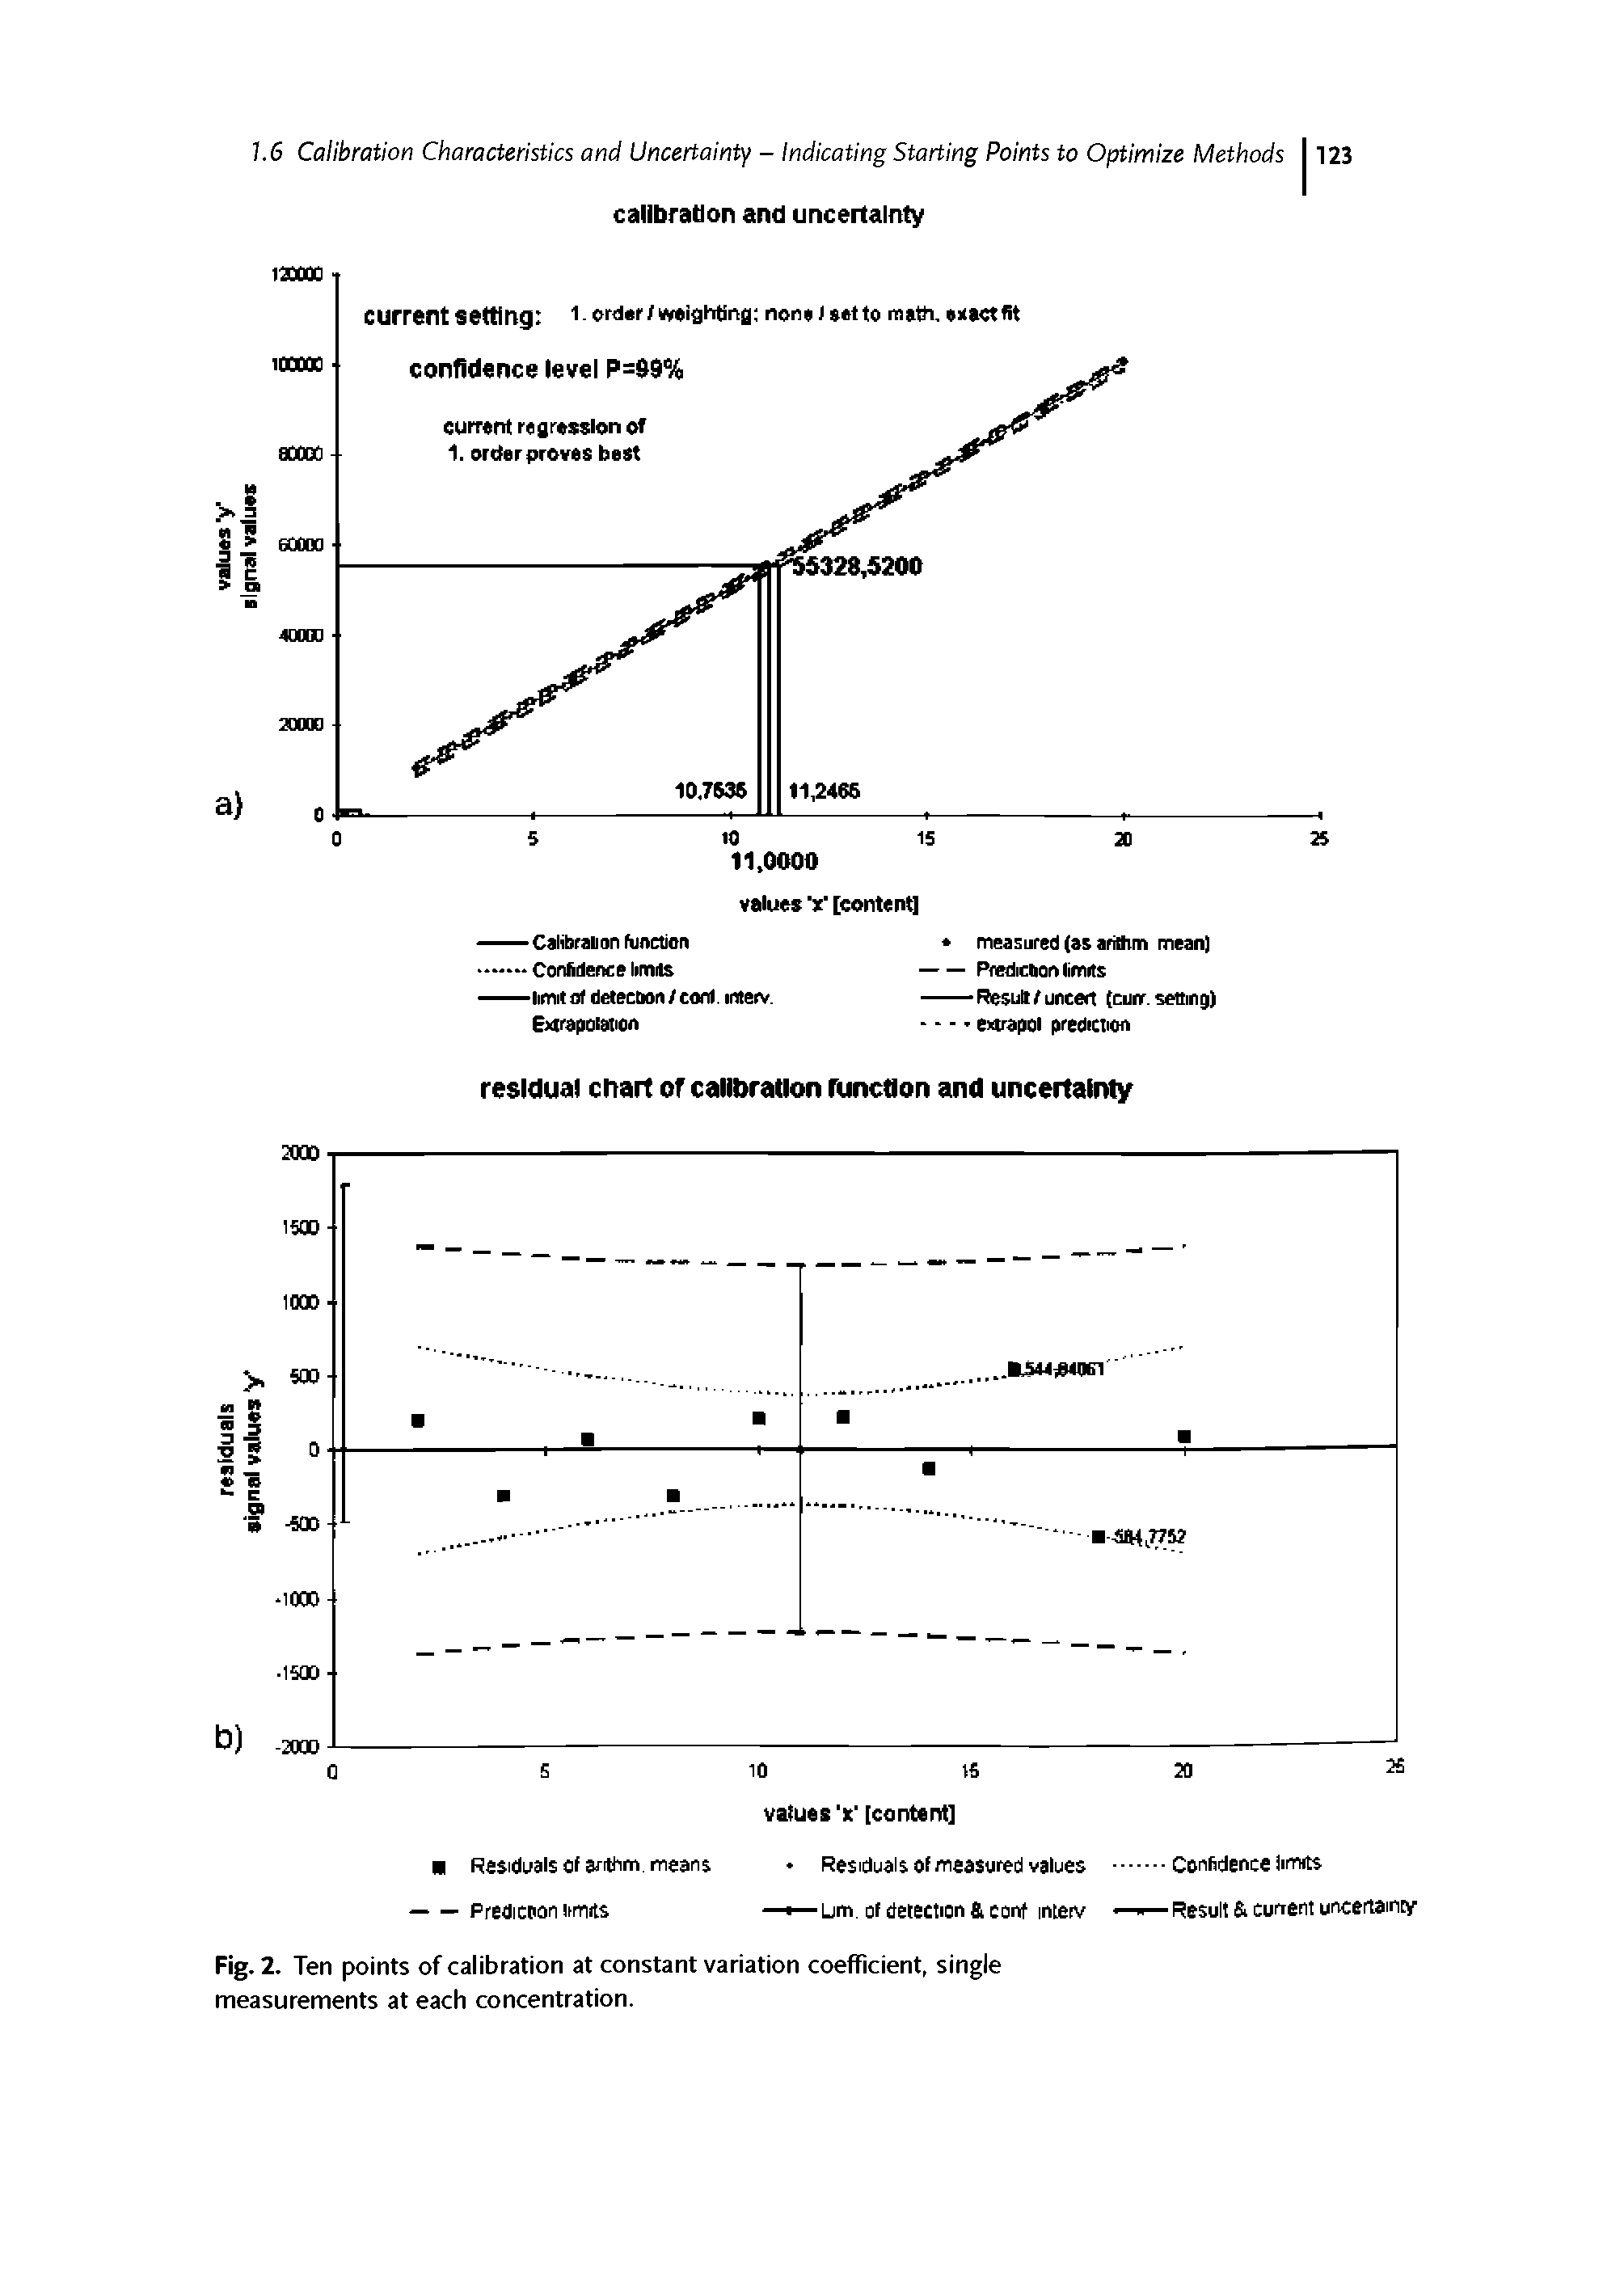 Fig. 2. Ten points of calibration at constant variation coefficient, single measurements at each concentration.